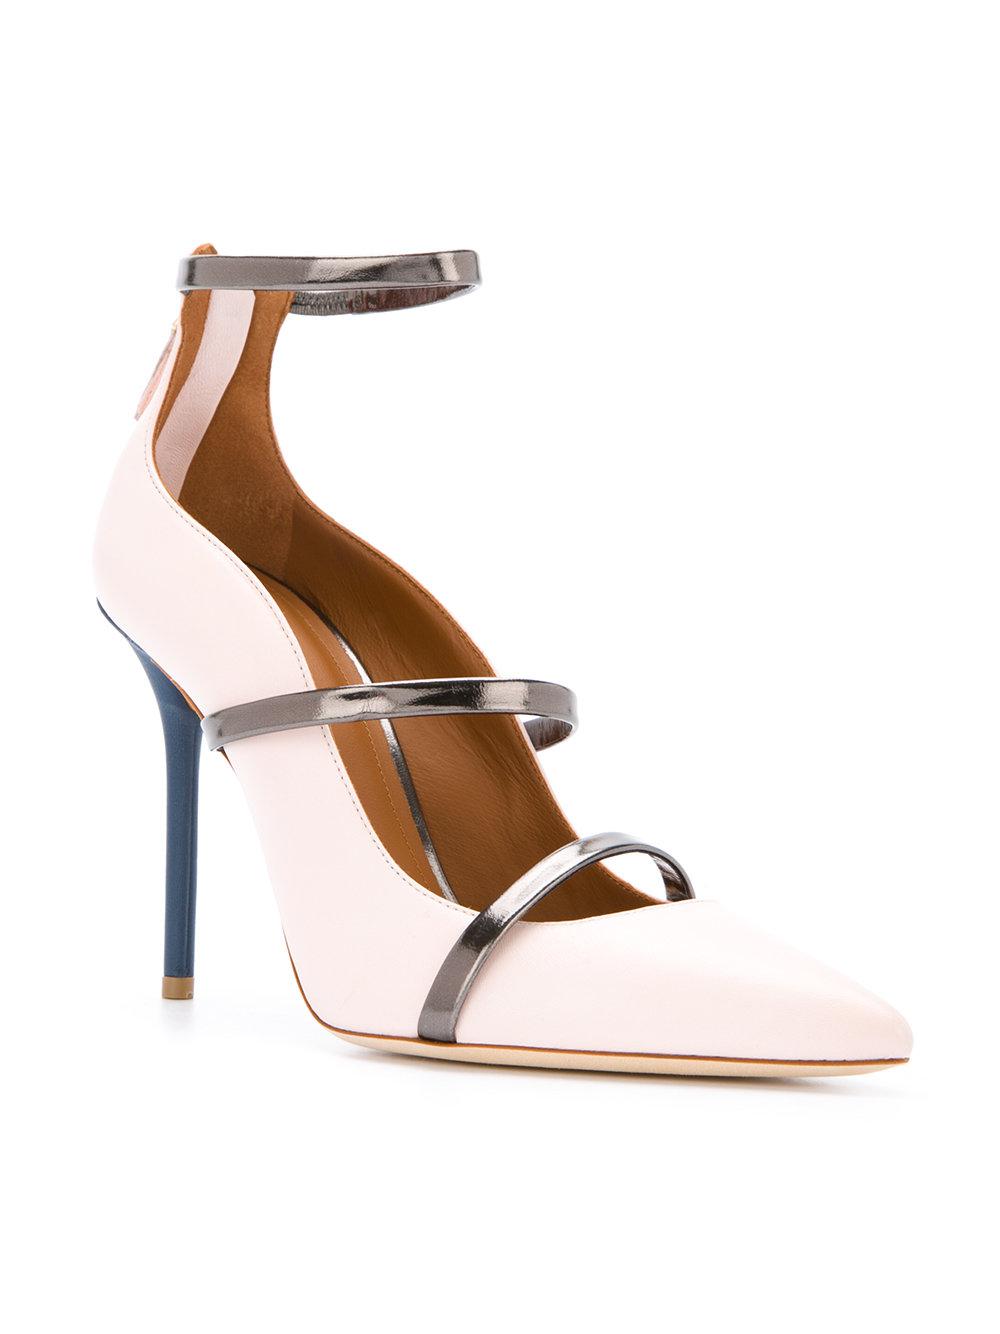 Malone Souliers Robyn Pumps in White - Lyst